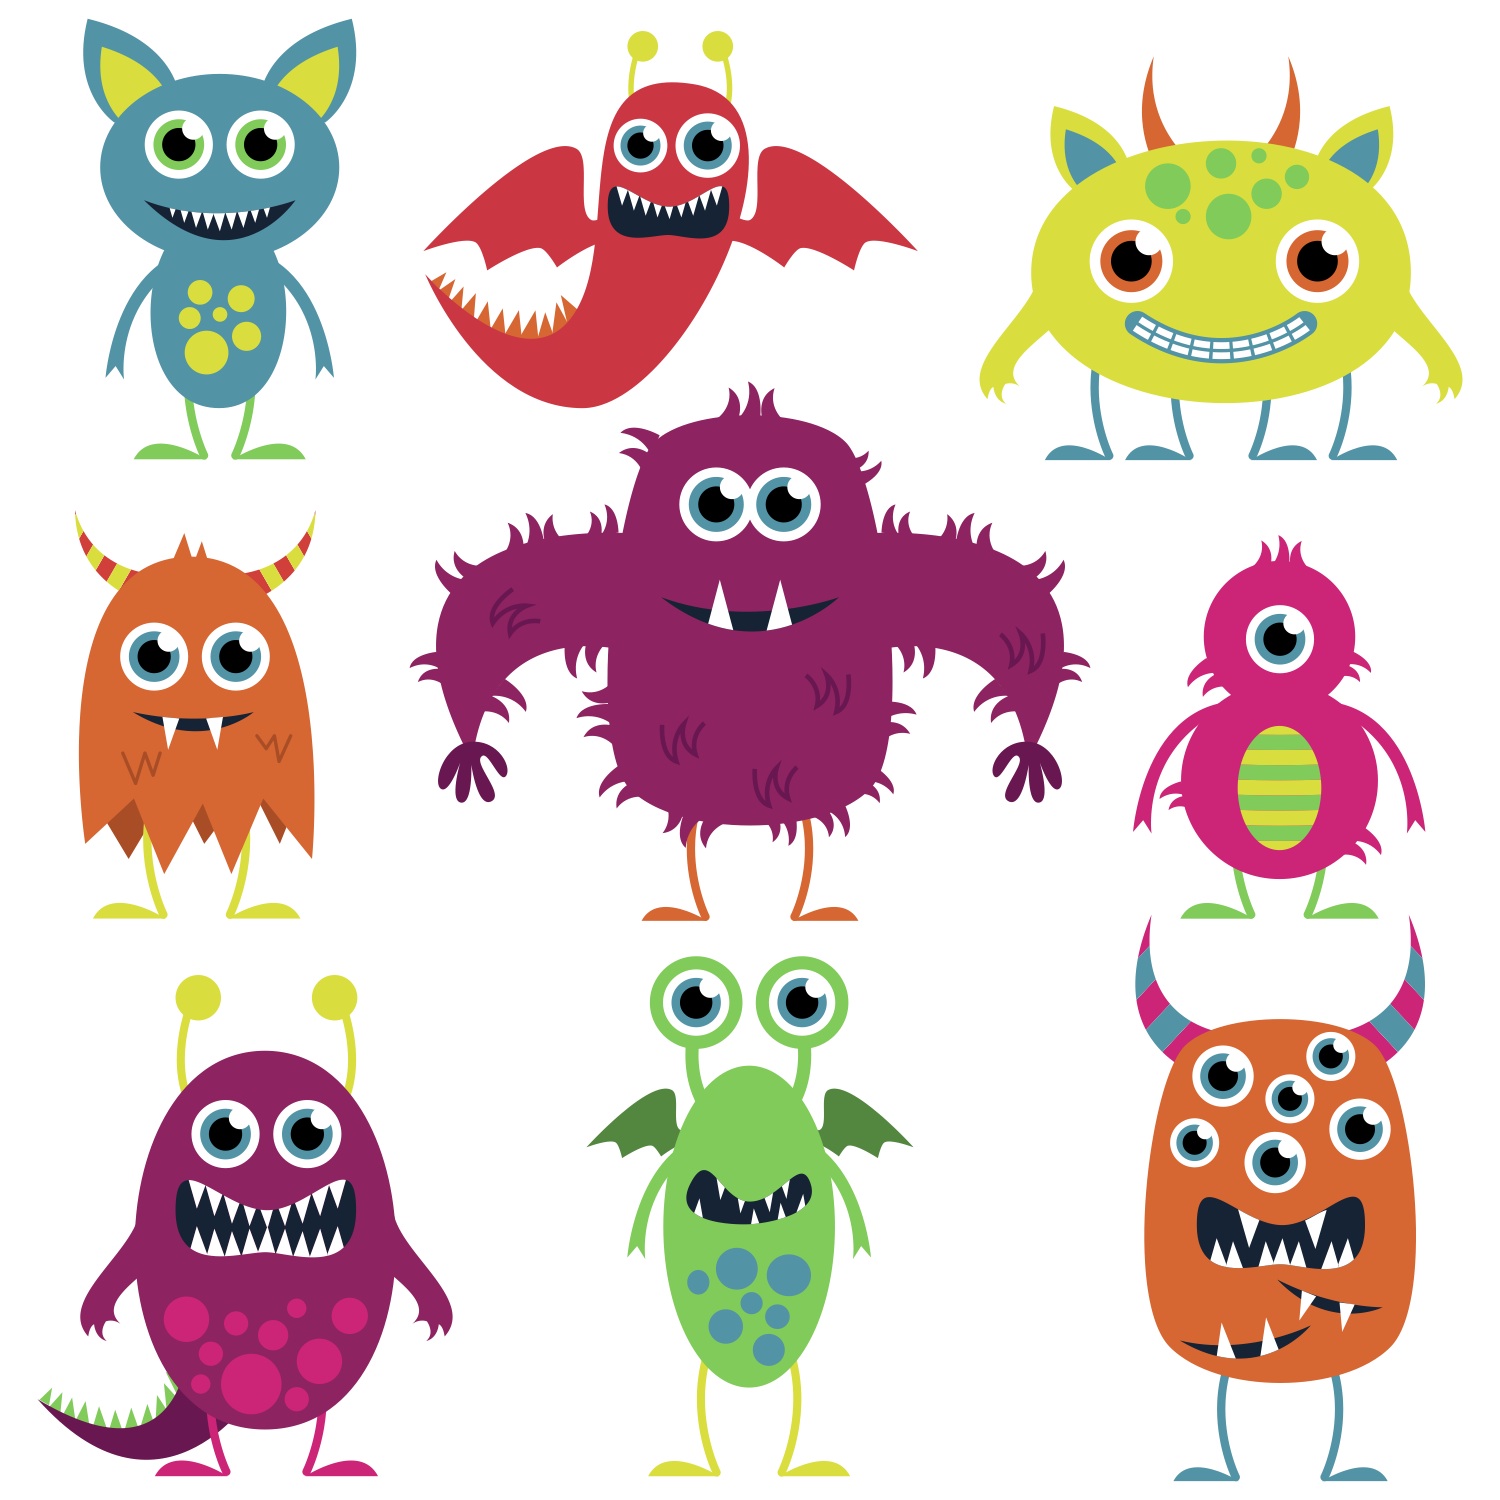 1000+ images about Cute Monster Illustrations ...